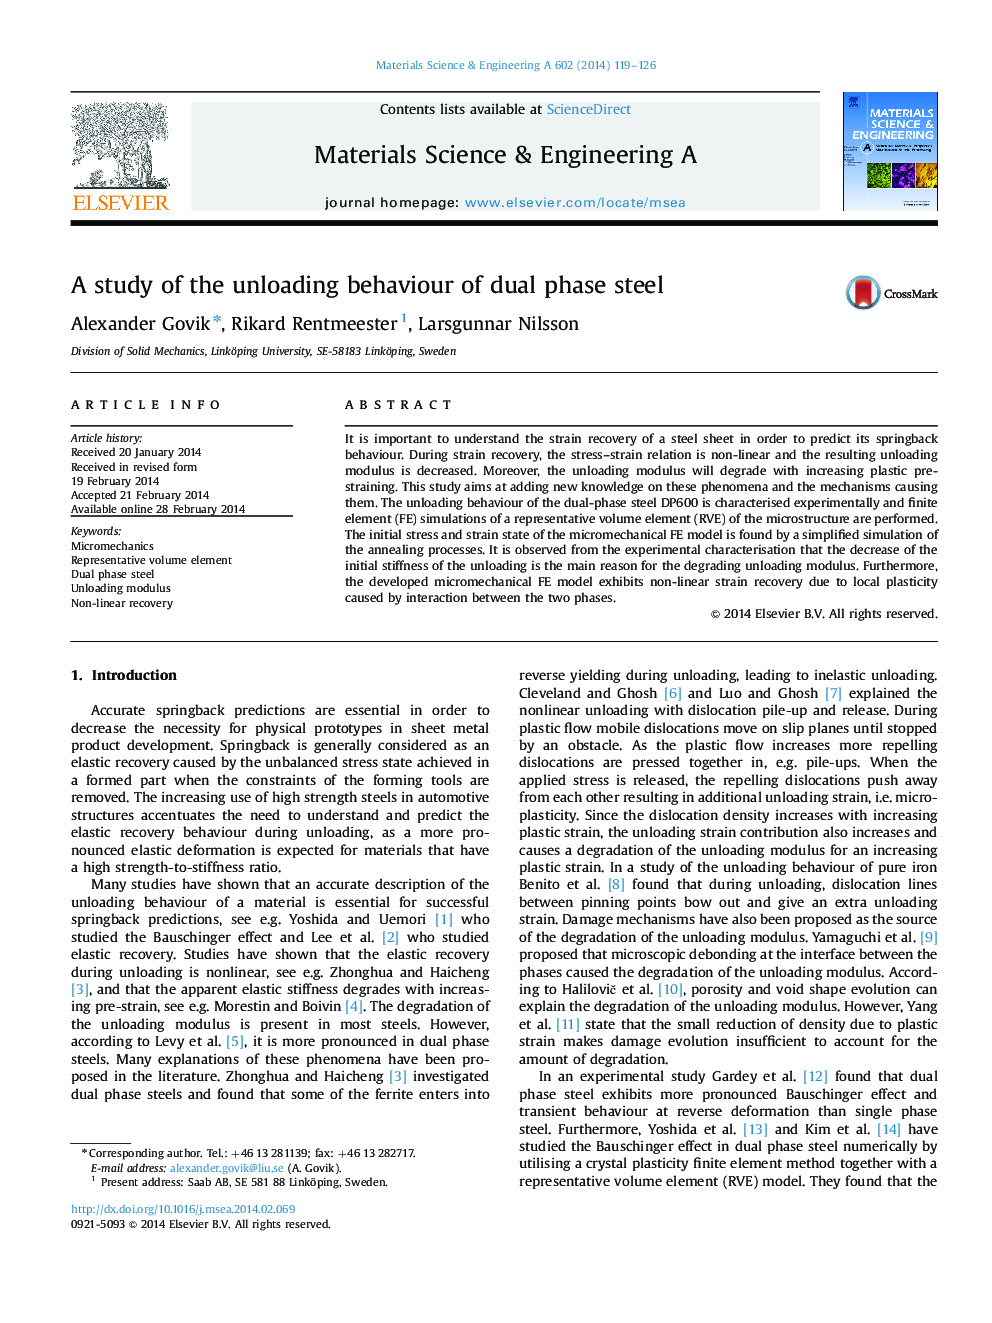 A study of the unloading behaviour of dual phase steel